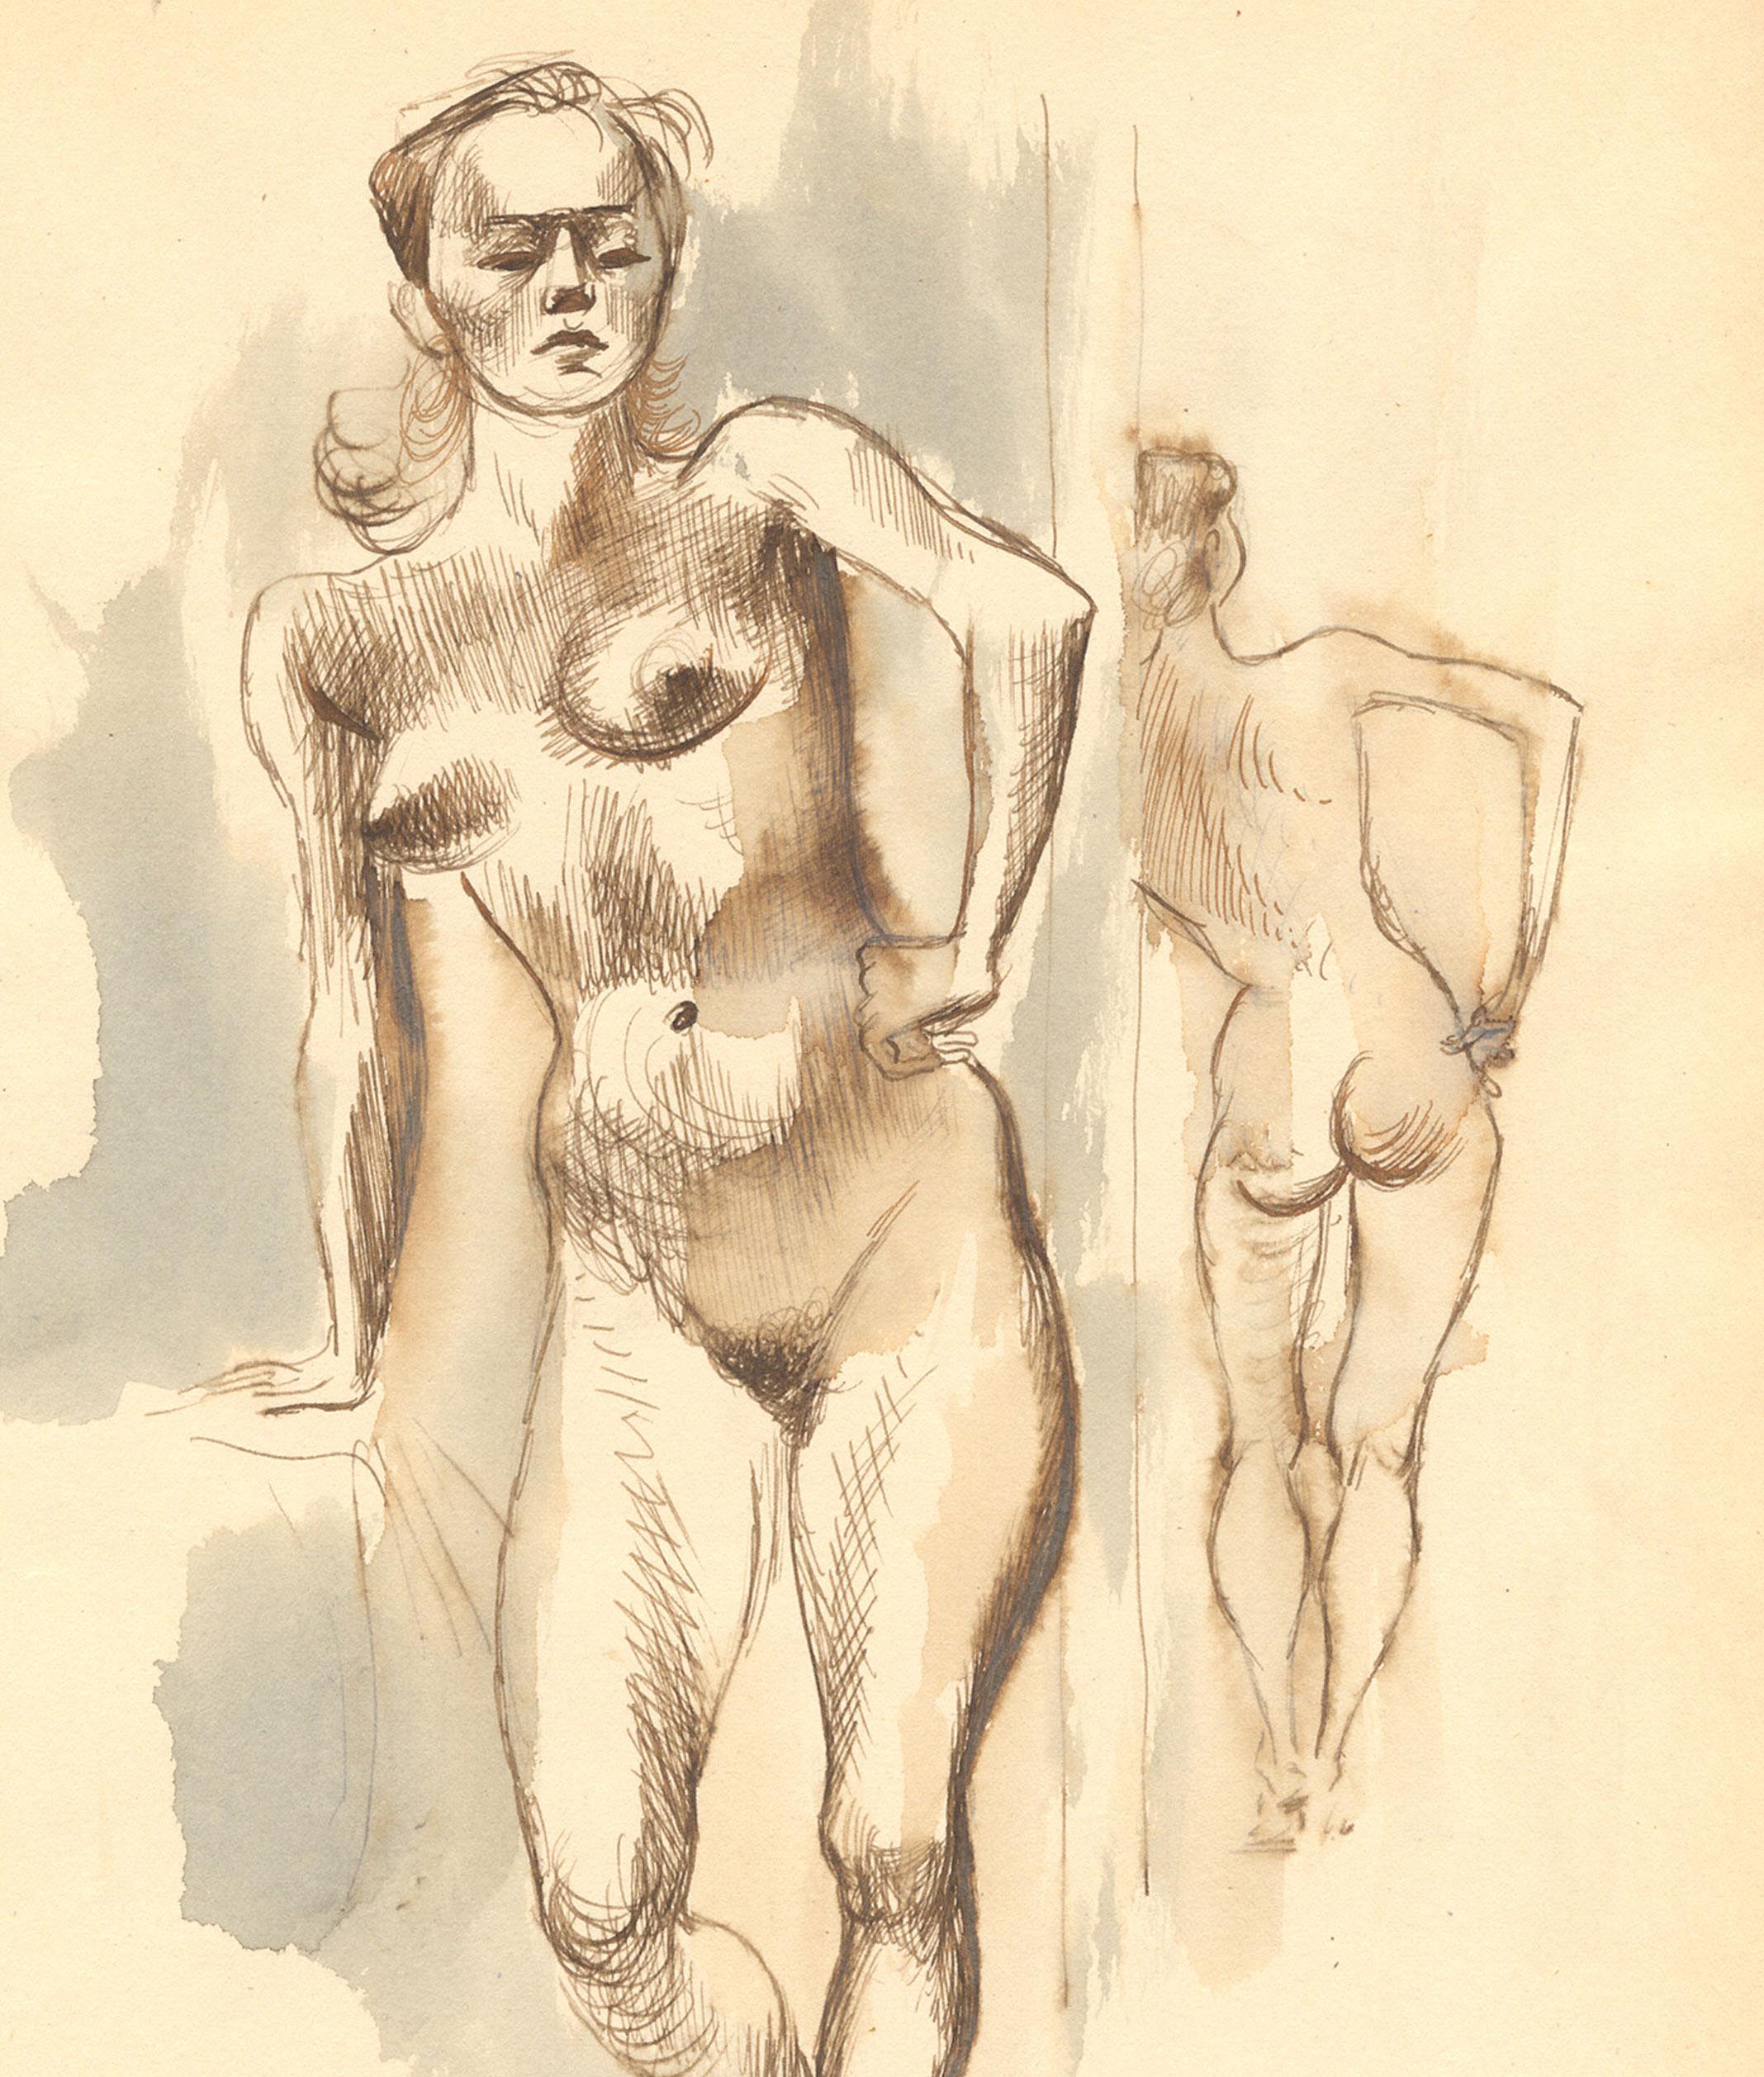 Nude in a Mirror
Ink and wash on paper, n.d.
Signed in red ink lower right (see photo)
Illustrated: Elliott & Wooden, page 153, a monograph on the artist's drawings
      Note: a copy of the book accompanies the drawing
Provenance: Estate of the